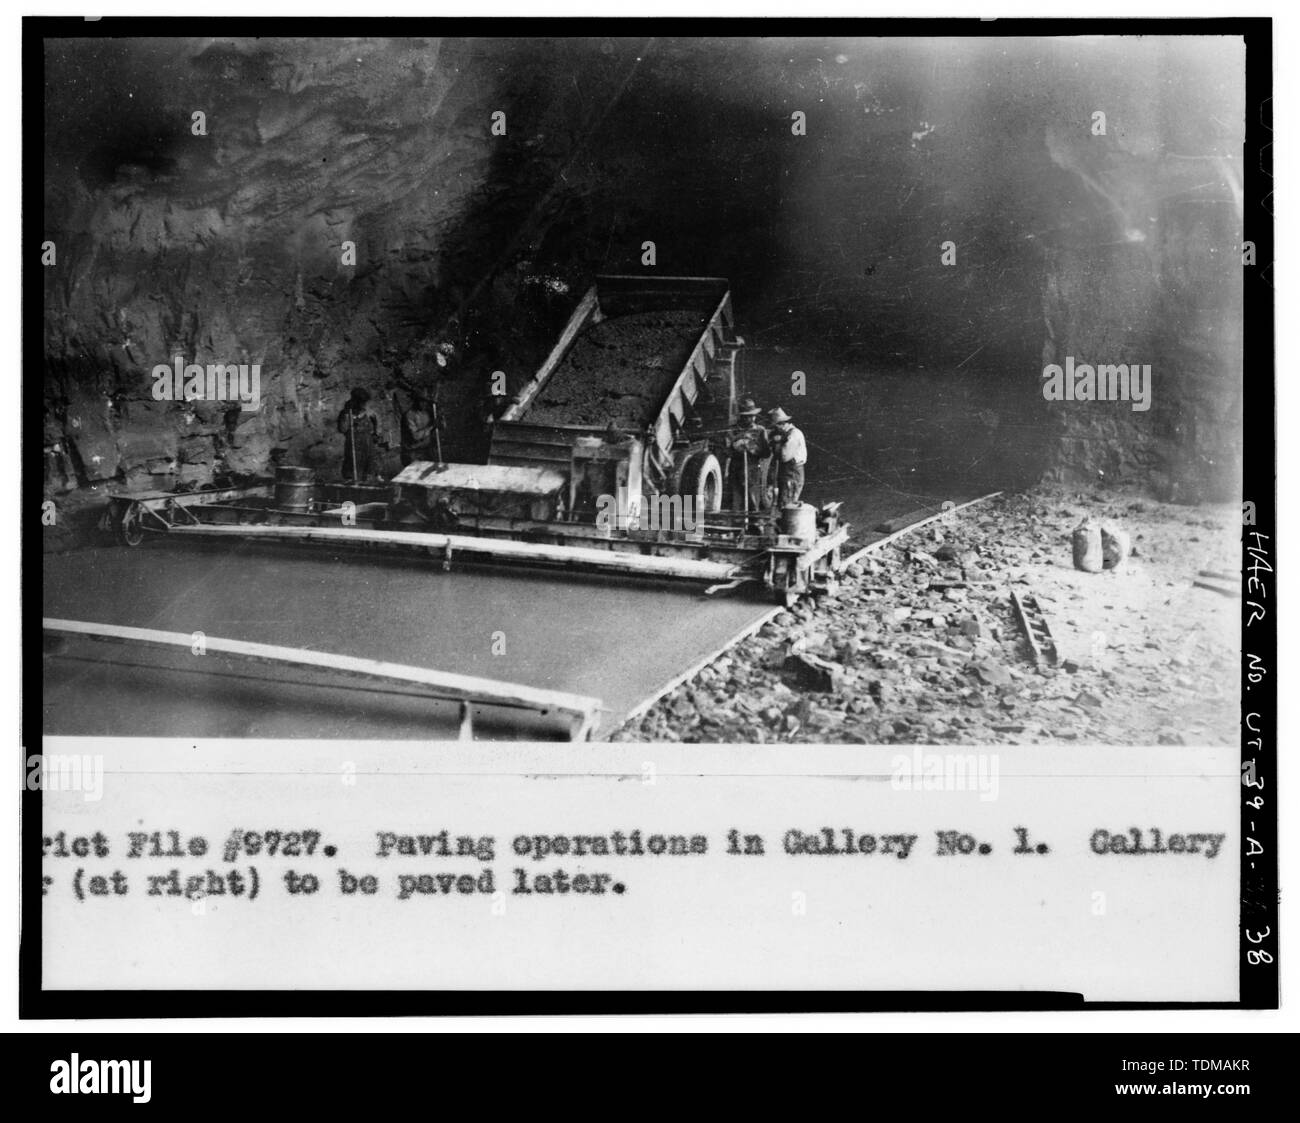 PAVING OPERATIONS IN GALLERY NO. 1 - Zion-Mount Carmel Highway, Tunnel, Two miles east of Zion Canyon Scenic Drive, Springdale, Washington County, UT; Nevada Construction Company; Bureau of Public Roads; Finch, J B; Mitchell, R R; Campbell, K B; Jones, T A; Scott, R N; Gregory, Herbert E; Cement Gun Construction Company; US Geologrical Service; US Bureau of Mining; Crane, W R; Reynolds-Ely Construction Co; Case Construction Company; Shea and Shea; Jurale, James, historian; Fraser, Clayton B, photographer; Anderson,  Michael, historian; Grogan, Brian C, photographer Stock Photo